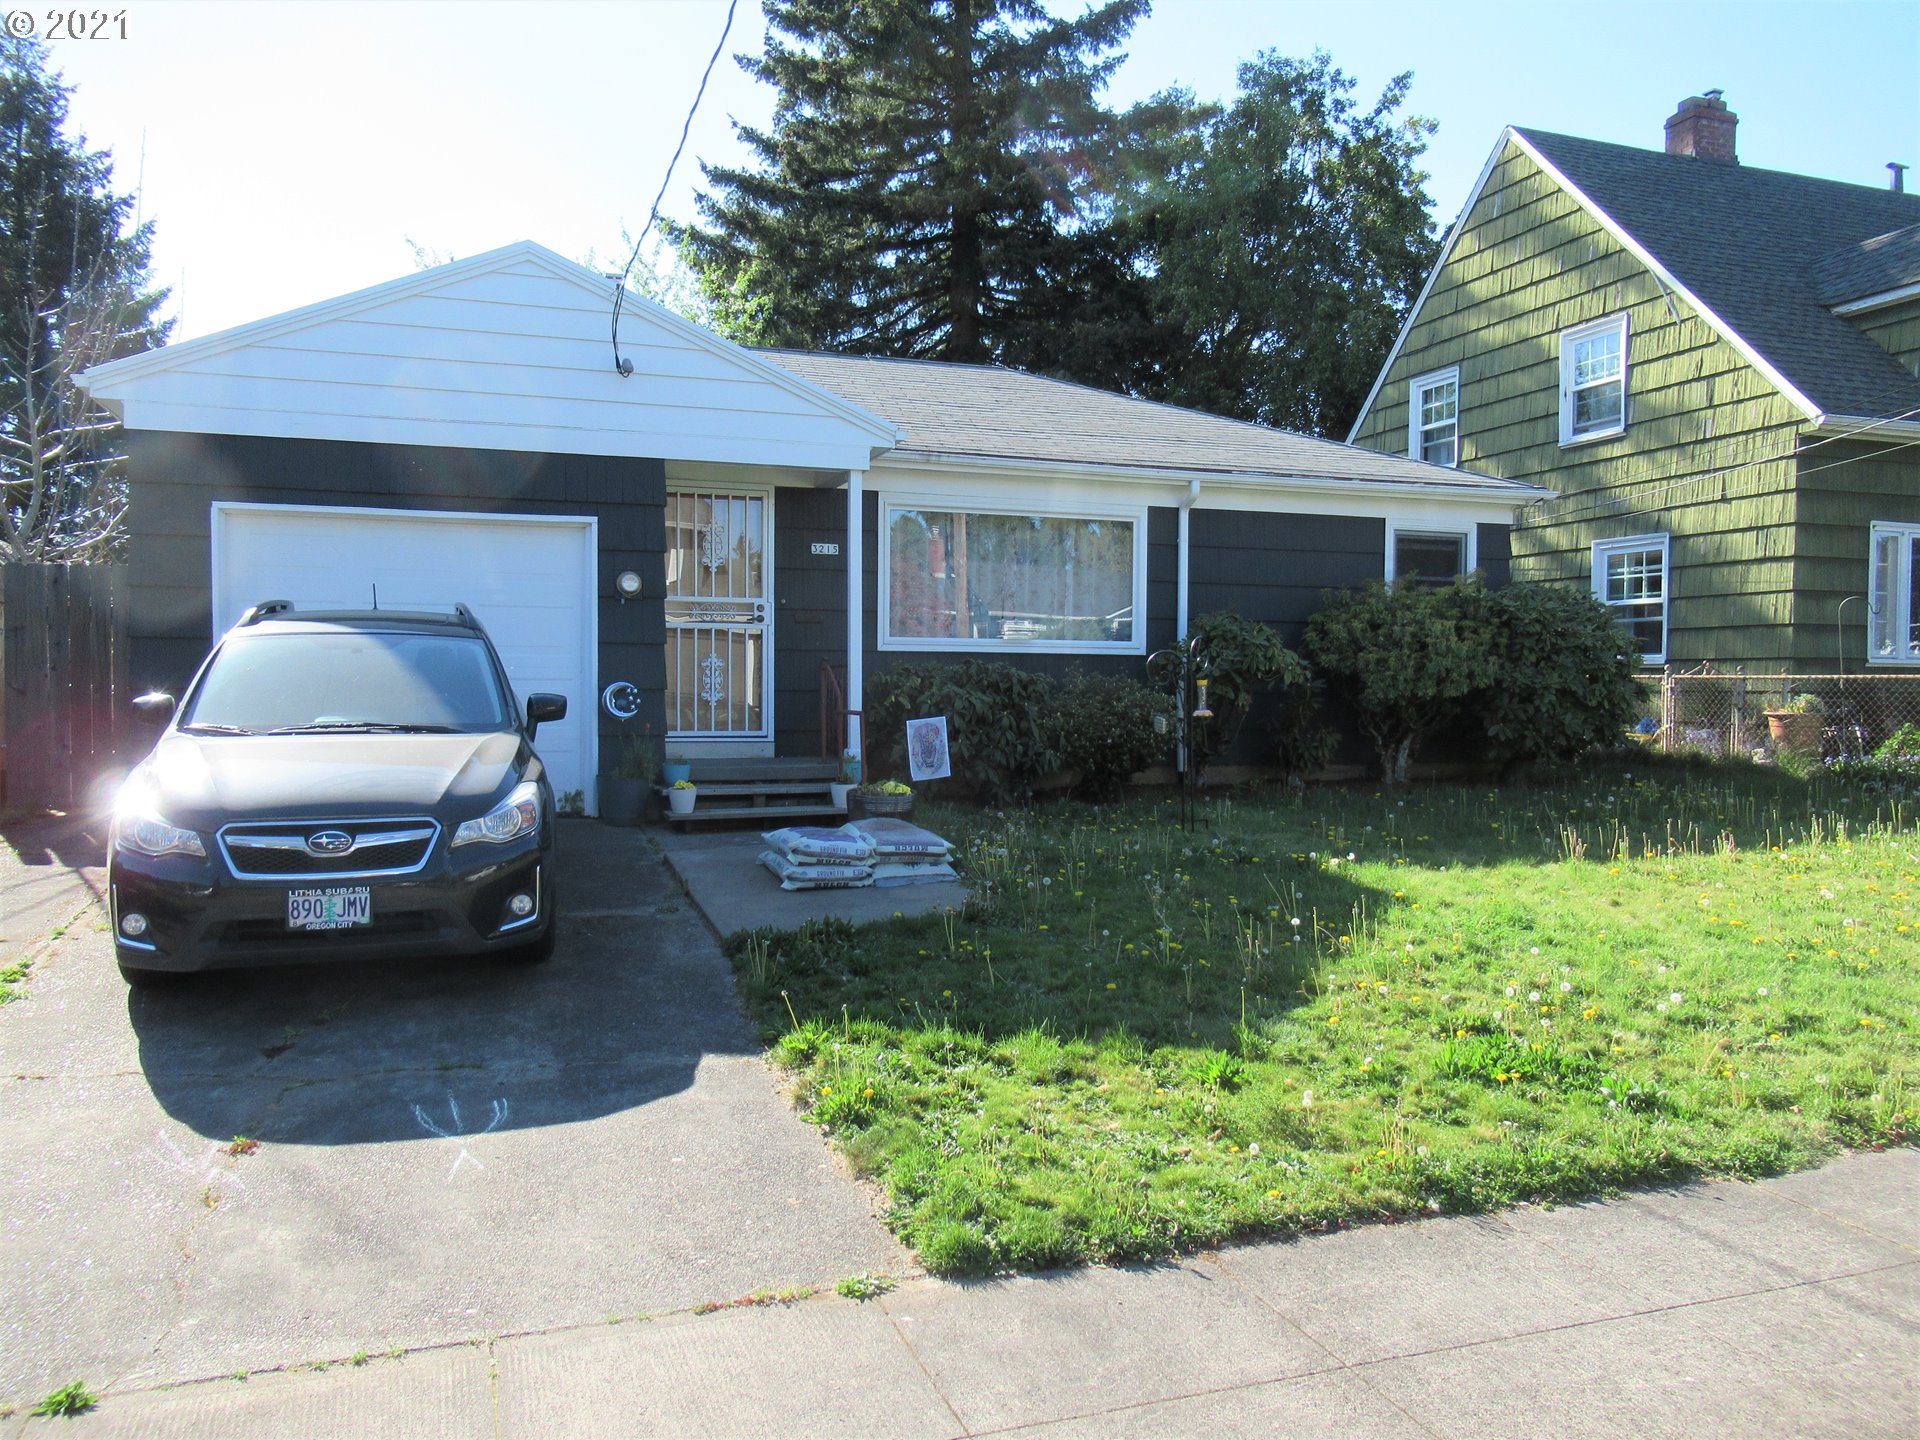 3215 SE 56TH AVE (1 of 1)